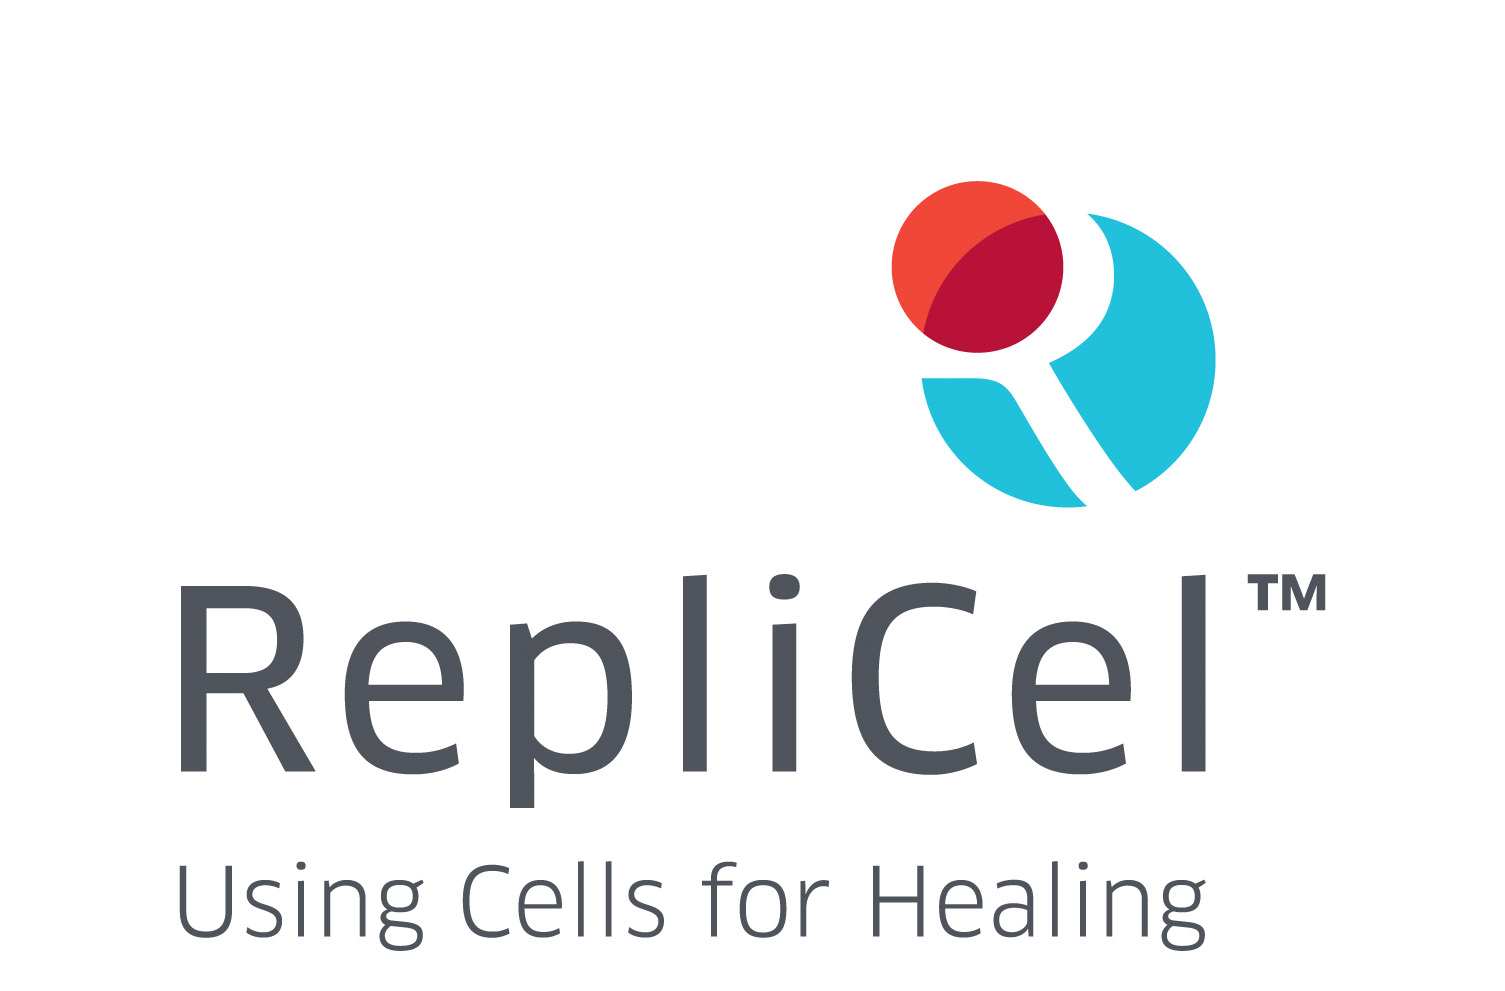 RepliCel Life Sciences, Inc., Tuesday, June 15, 2021, Press release picture